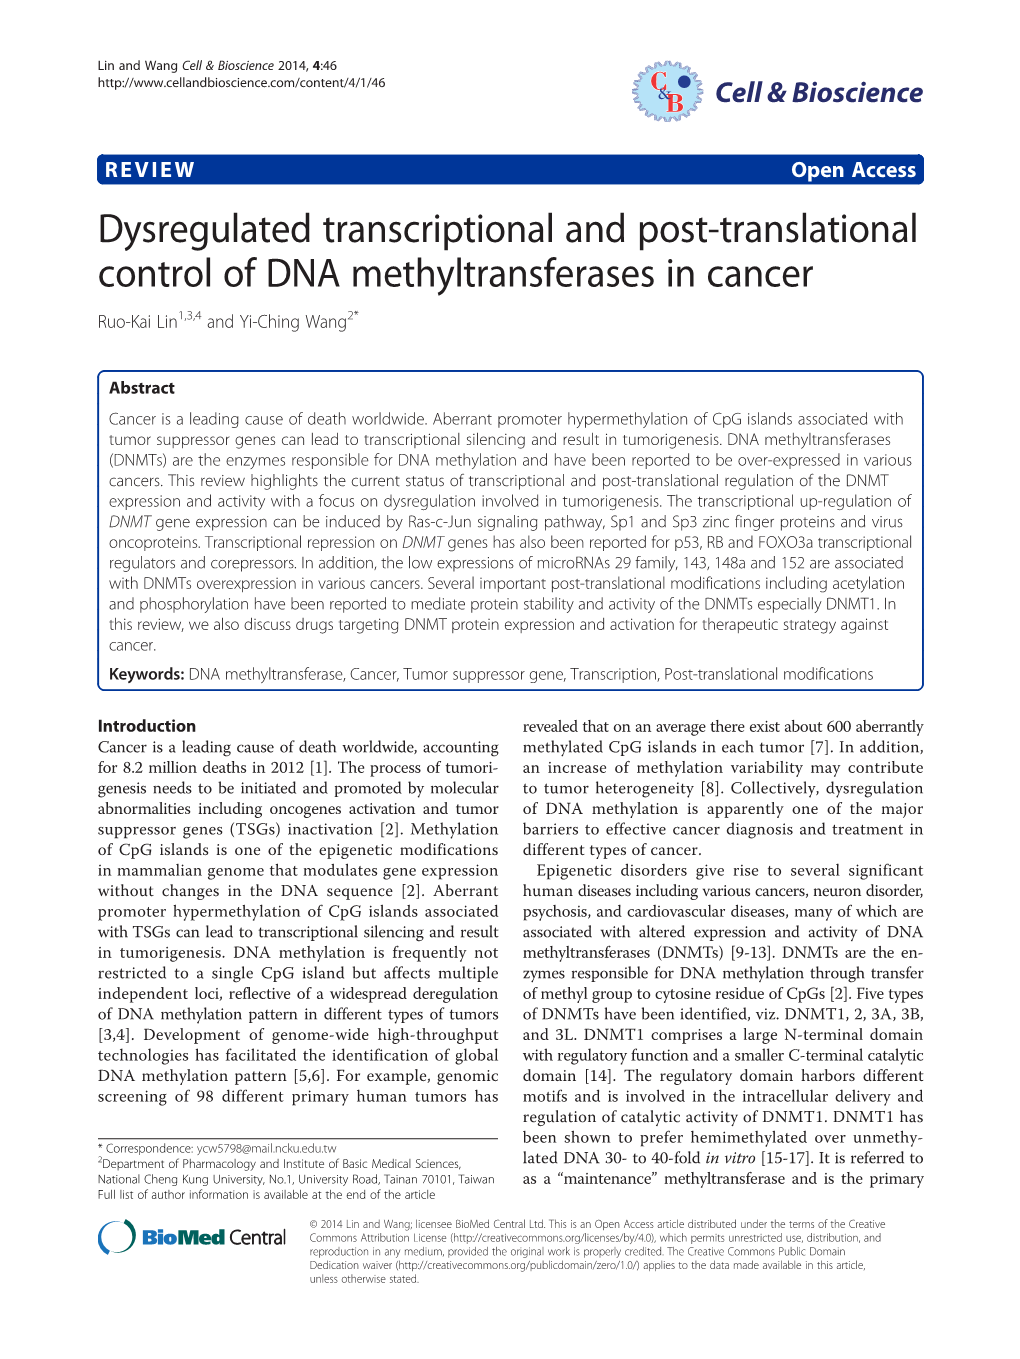 VIEW Open Access Dysregulated Transcriptional and Post-Translational Control of DNA Methyltransferases in Cancer Ruo-Kai Lin1,3,4 and Yi-Ching Wang2*